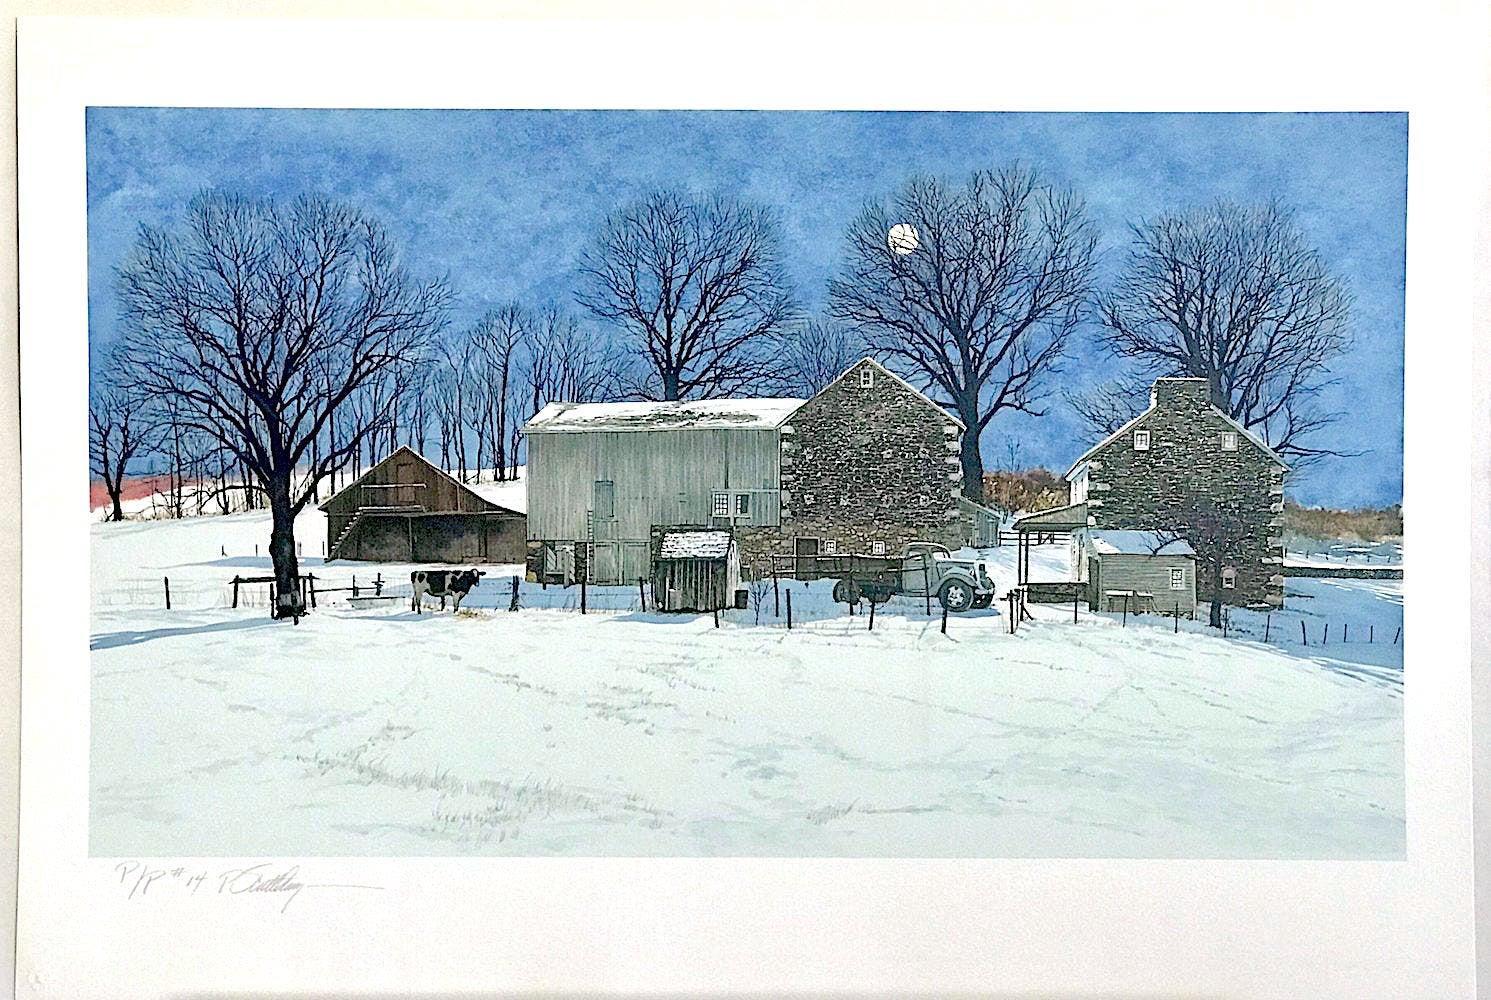 DOMINO Signed Lithograph, Historic Stone Farmhouse, Bucks County Landscape, Cow - Blue Landscape Print by Peter Sculthorpe